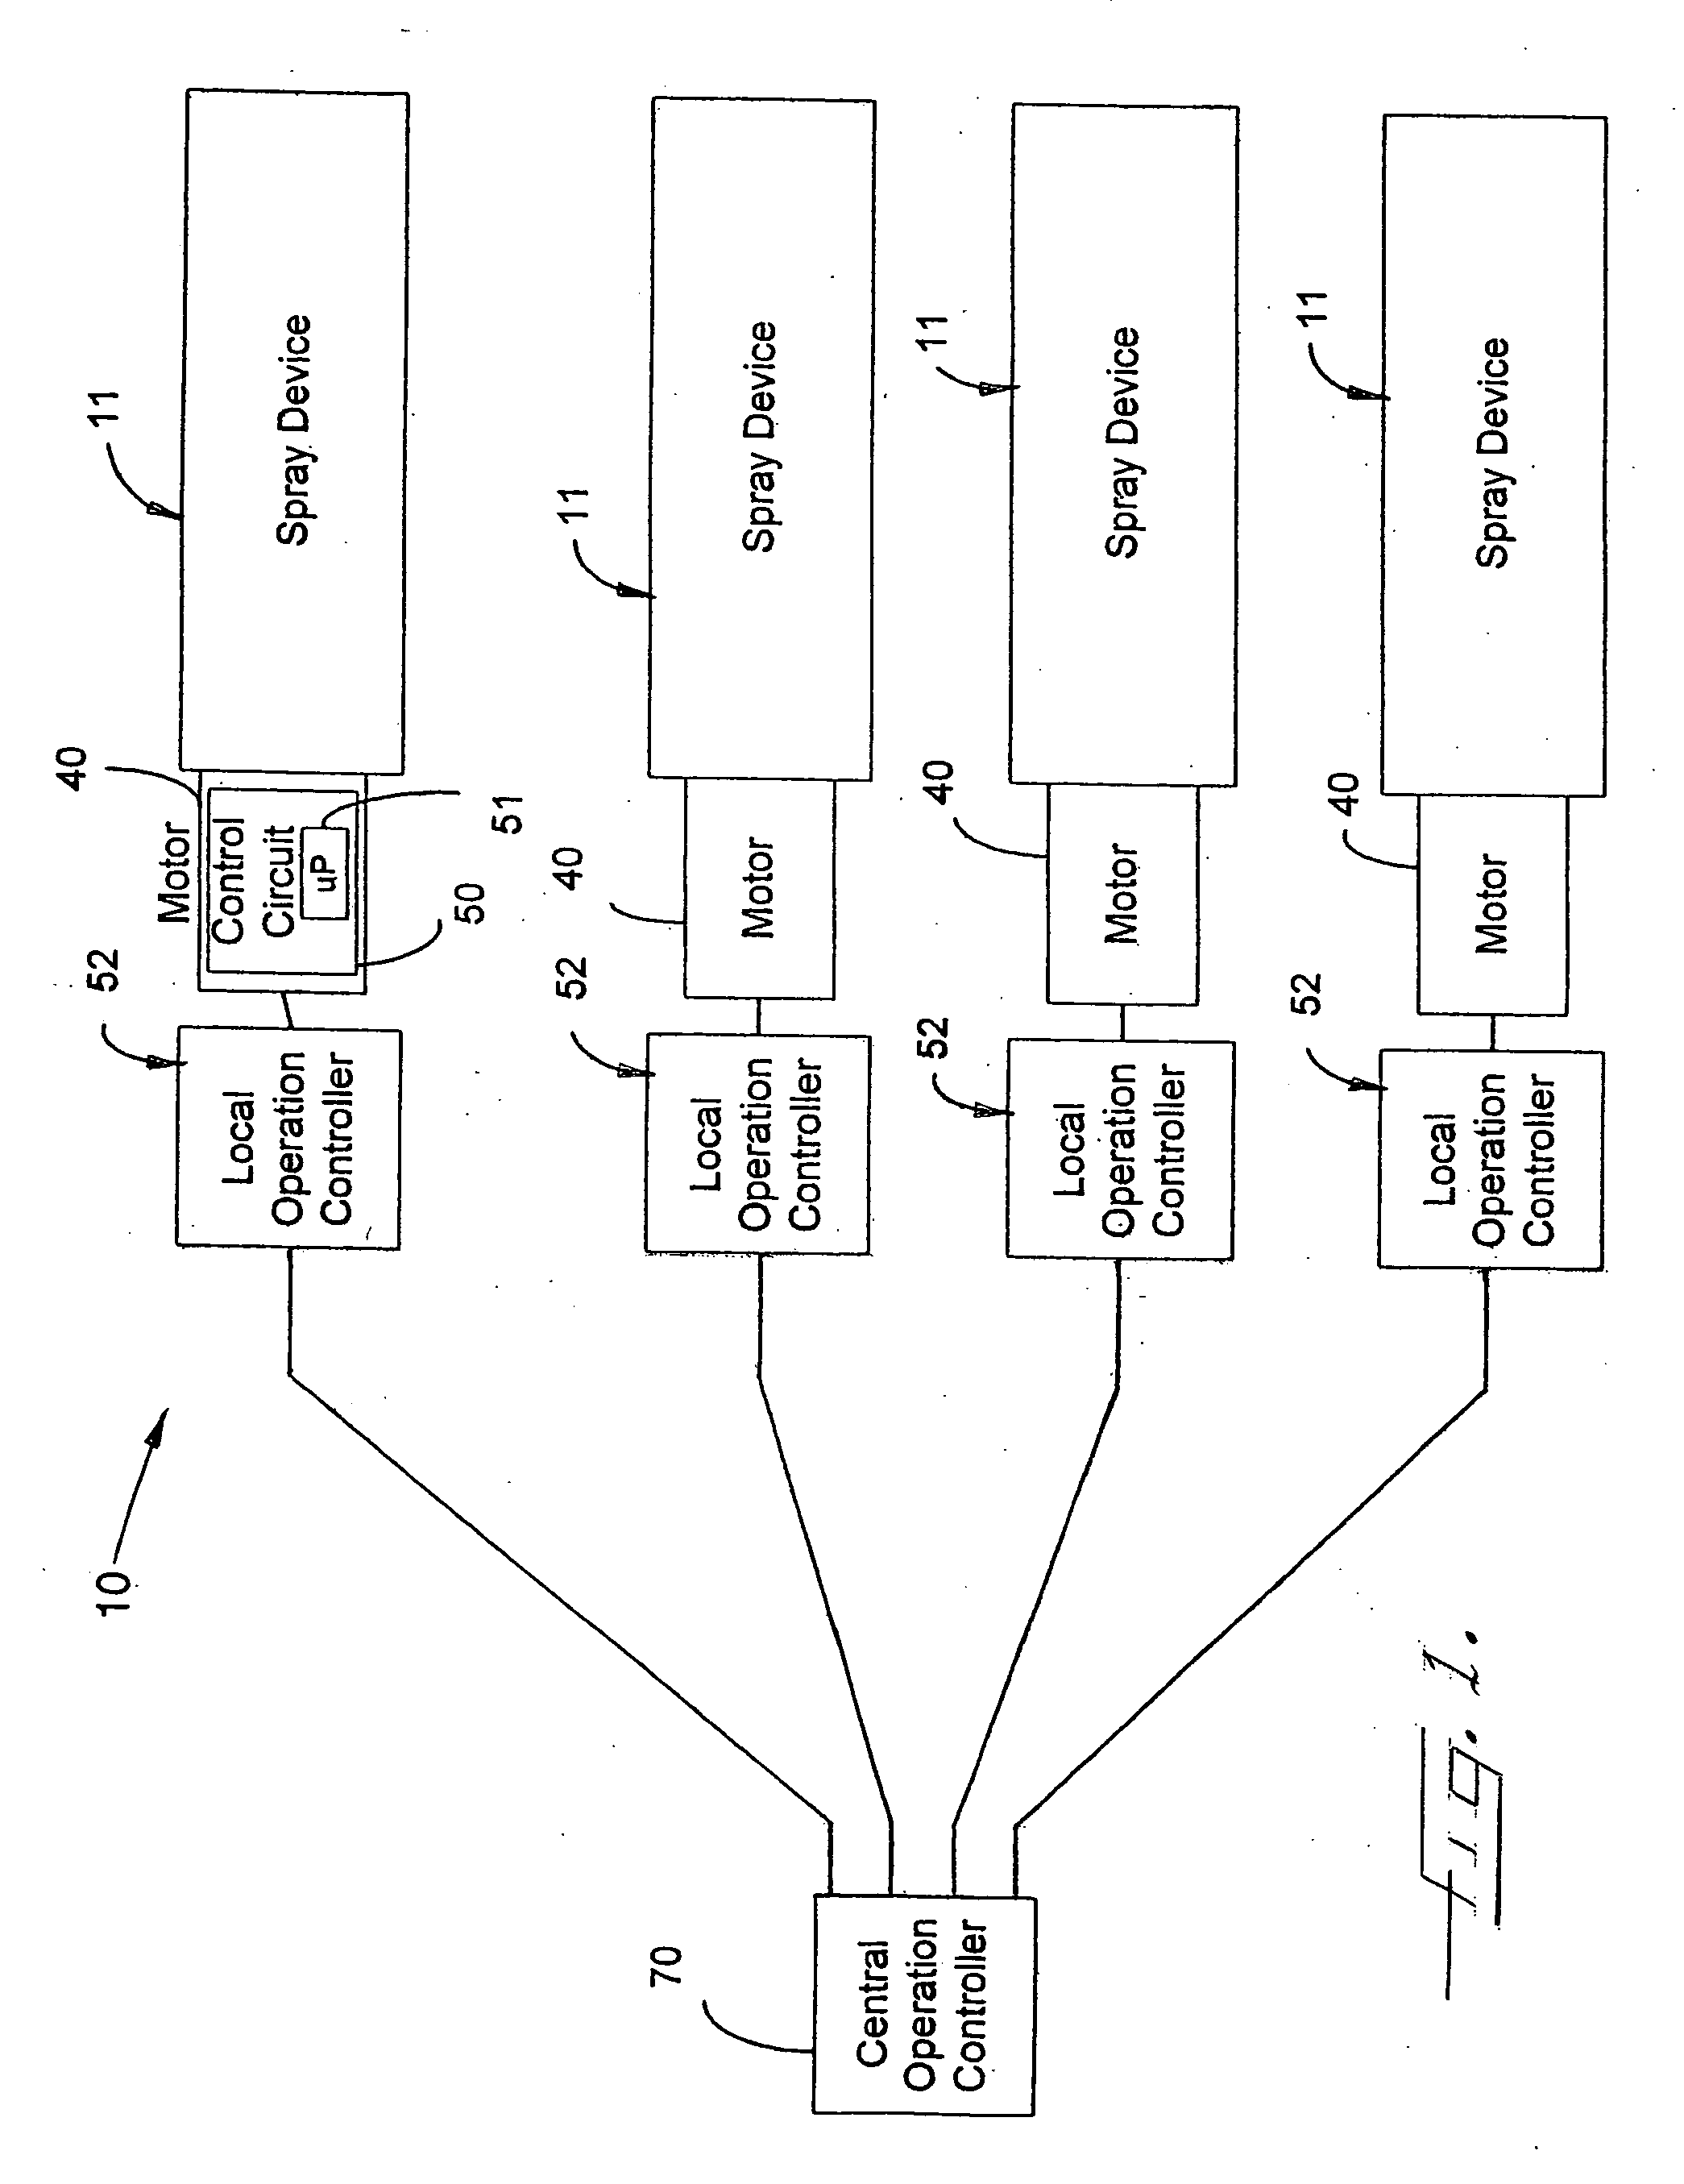 Spraying system with automated nozzle cleaning device